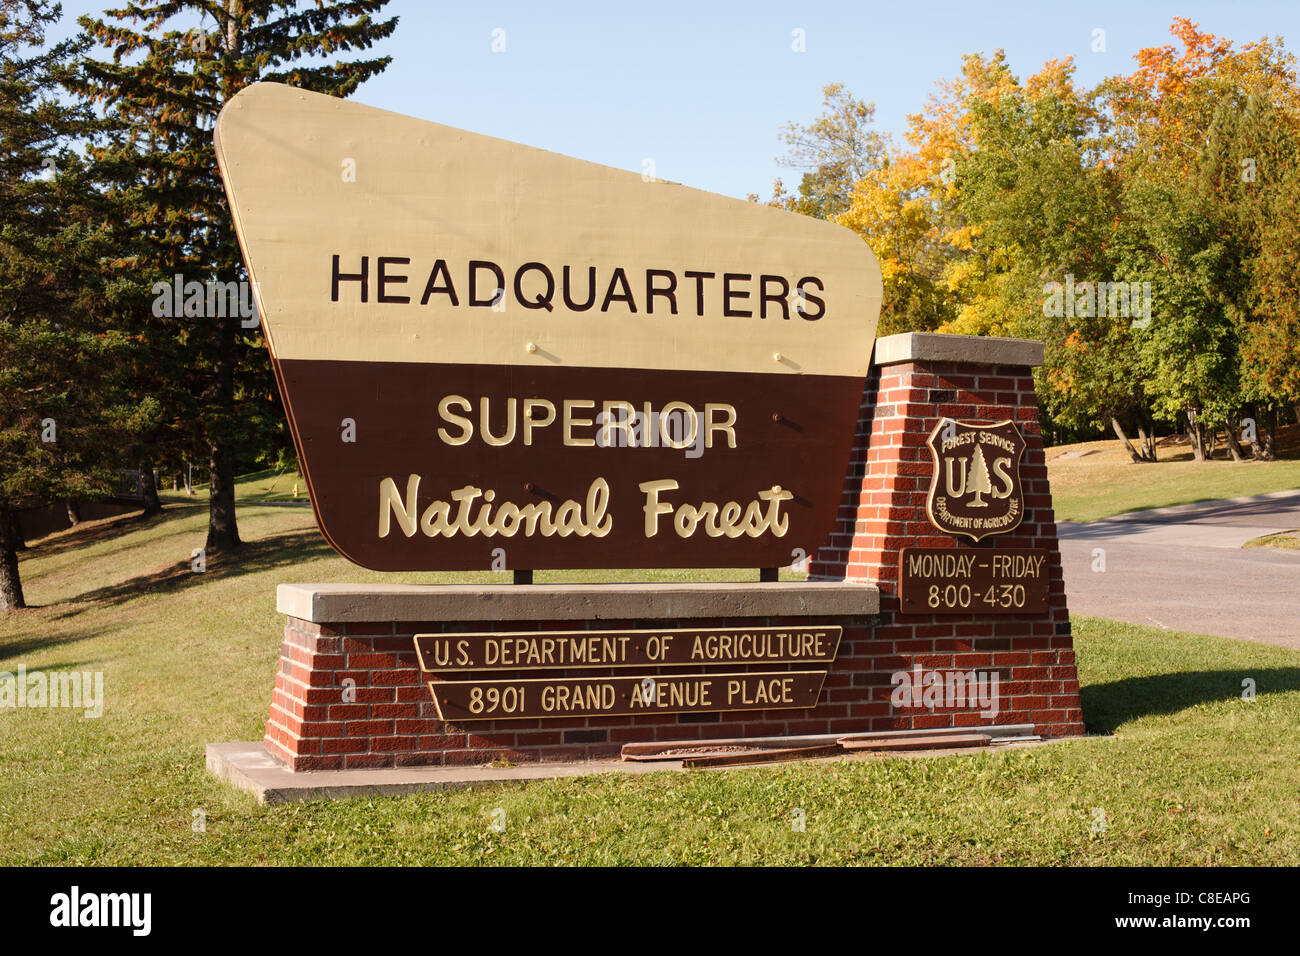 Headquarters sign for the Superior National Forest - Duluth, Minnesota. Stock Photo